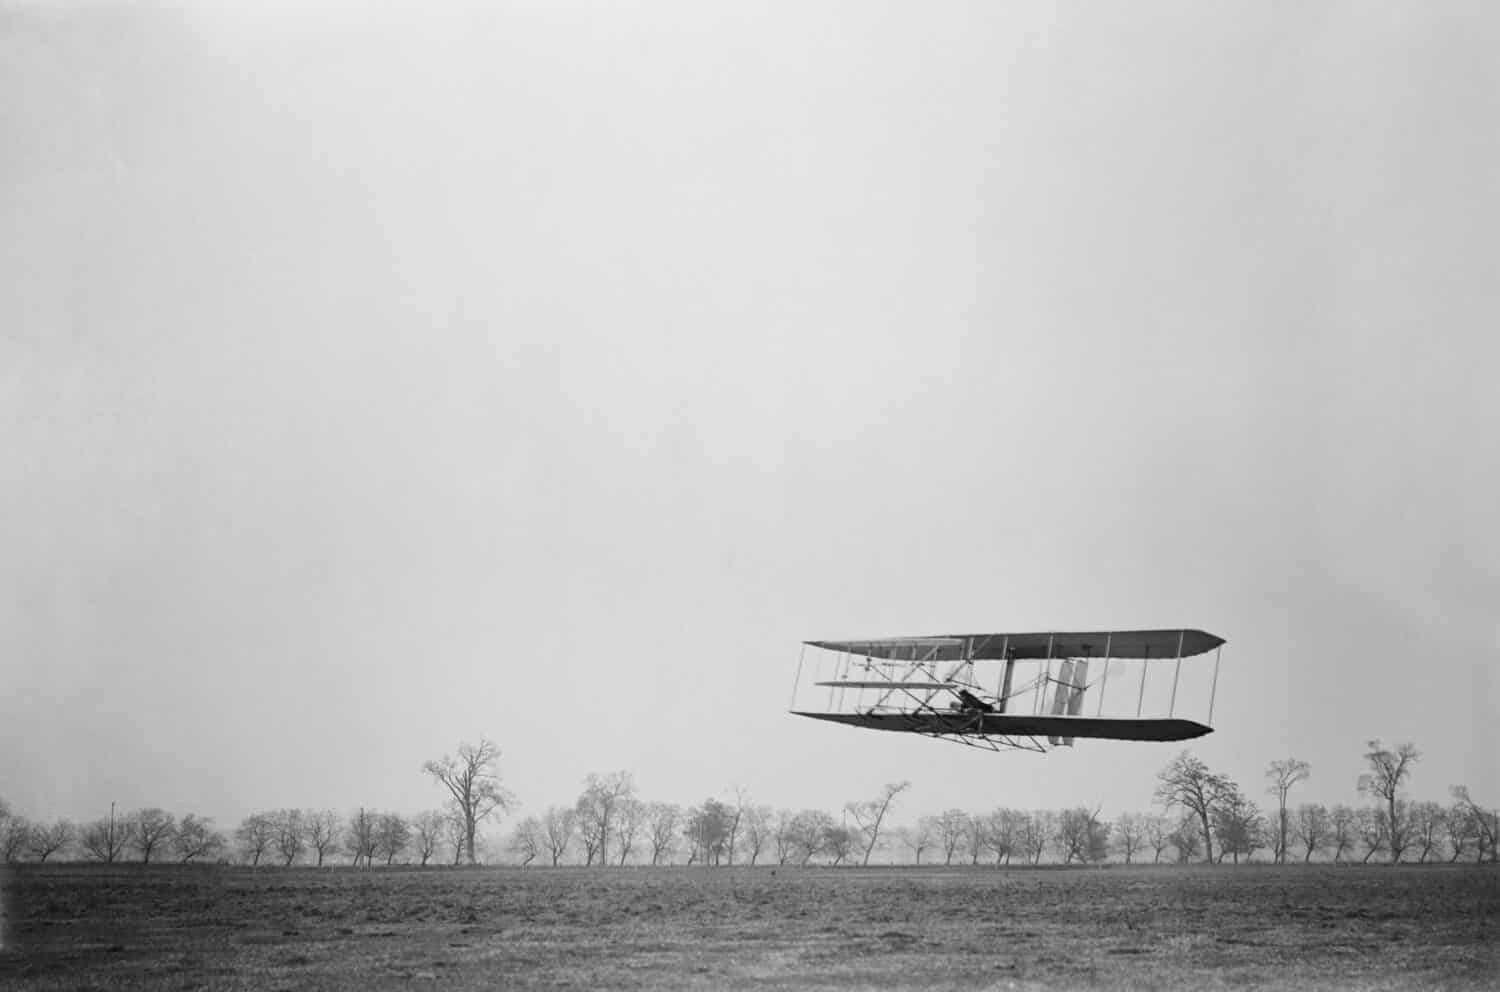 Orville Wright 1871-1948 in flight over treetops covering a distance of approximately 1 760 feet in 40 1/5 seconds at Huffman Prairie Dayton Ohio. November 16 1904.